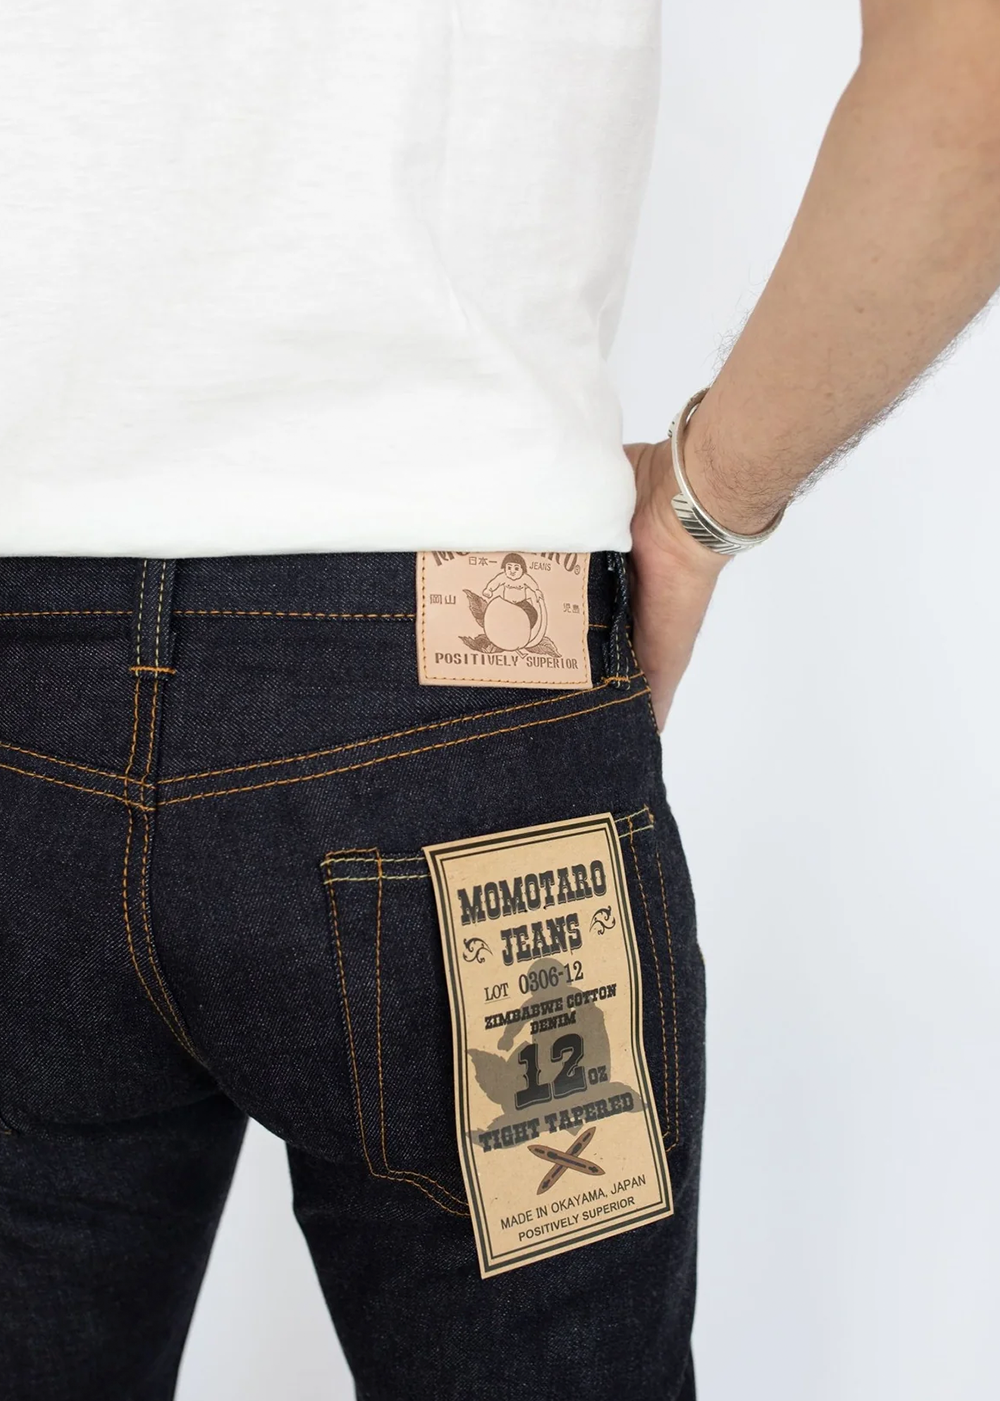 12 oz Tight Tapered Jeans